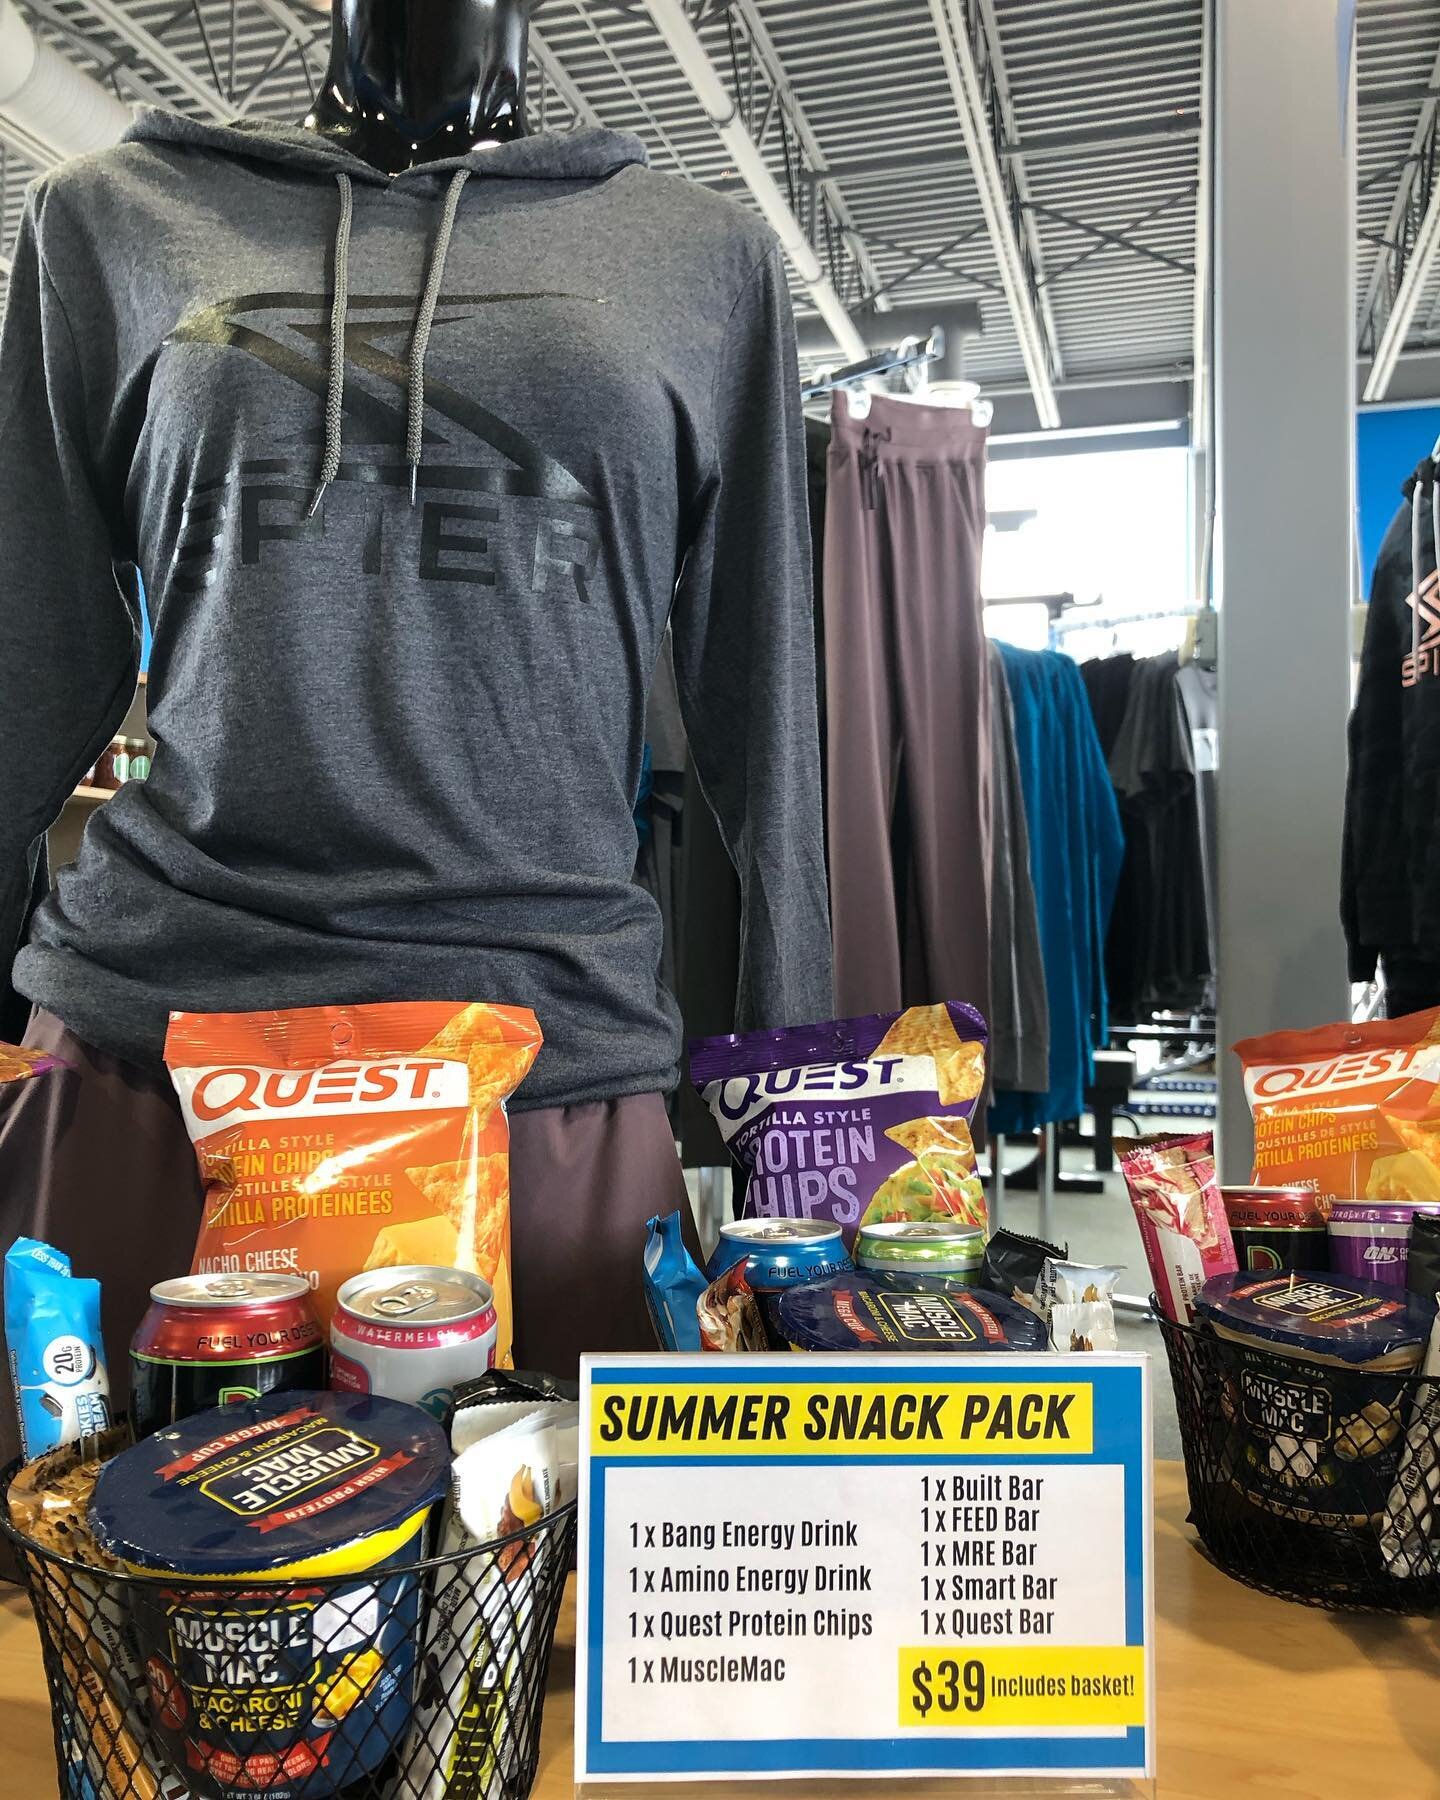 Summer snack packs are back!! Loaded with healthy snacks, this is the best way to taste-test before you buy a case of bars or energy drinks. And only $39! 

While you&rsquo;re in the area, why not grab a new hoodie or tee from Spier clothing? 🙌🏻

#